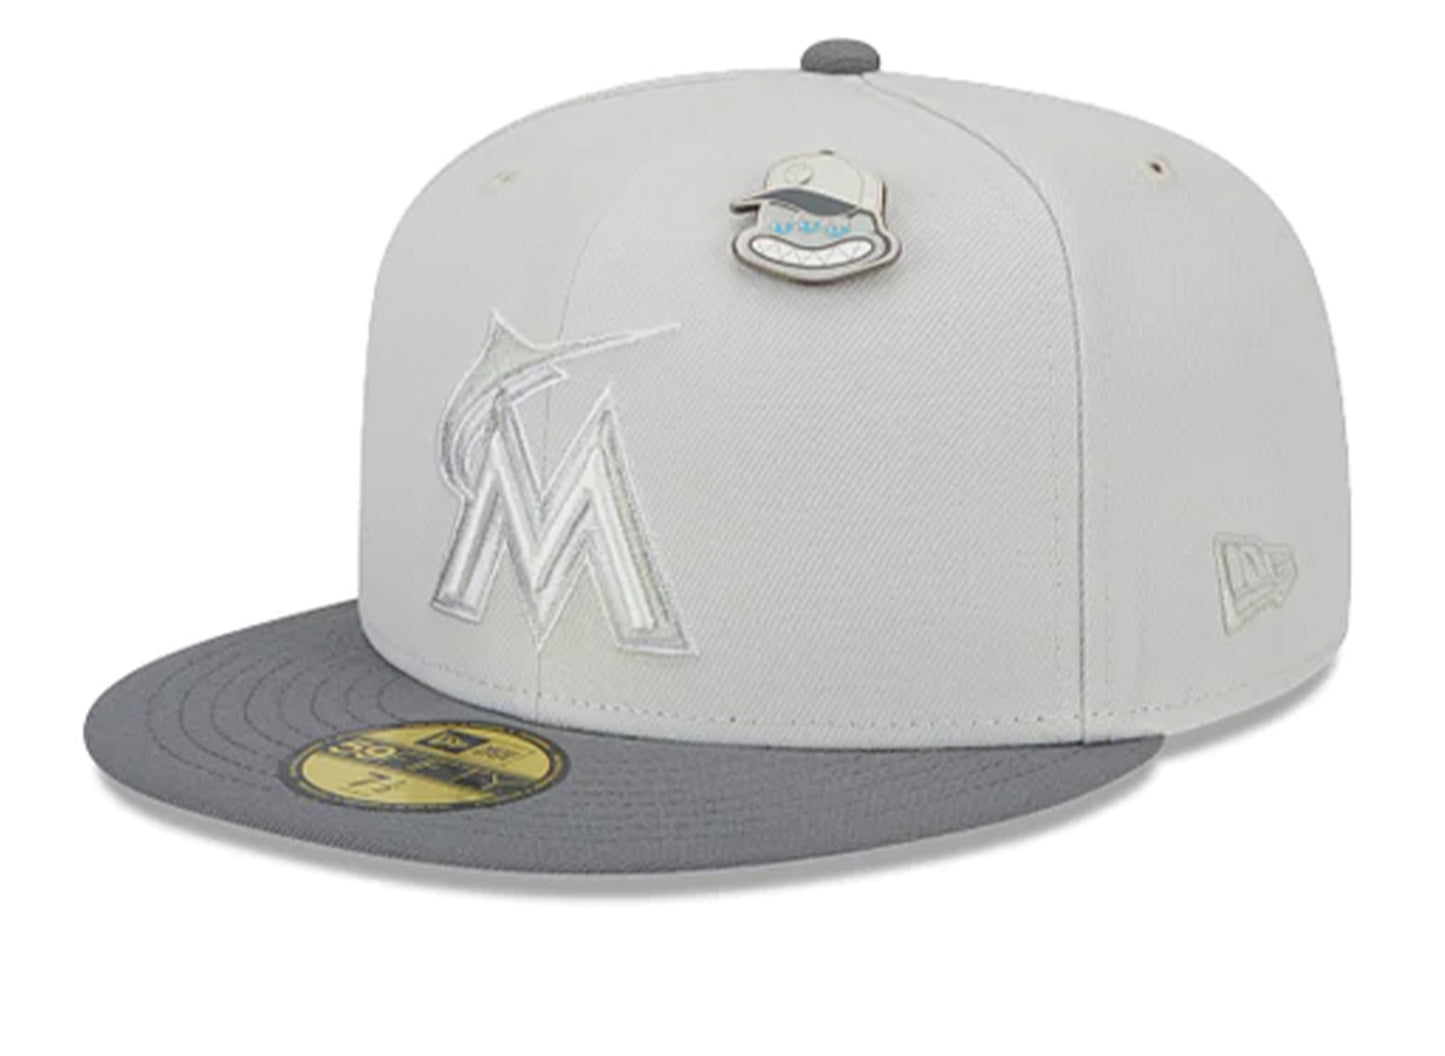 New Era Outer Space Miami Marlins Hat